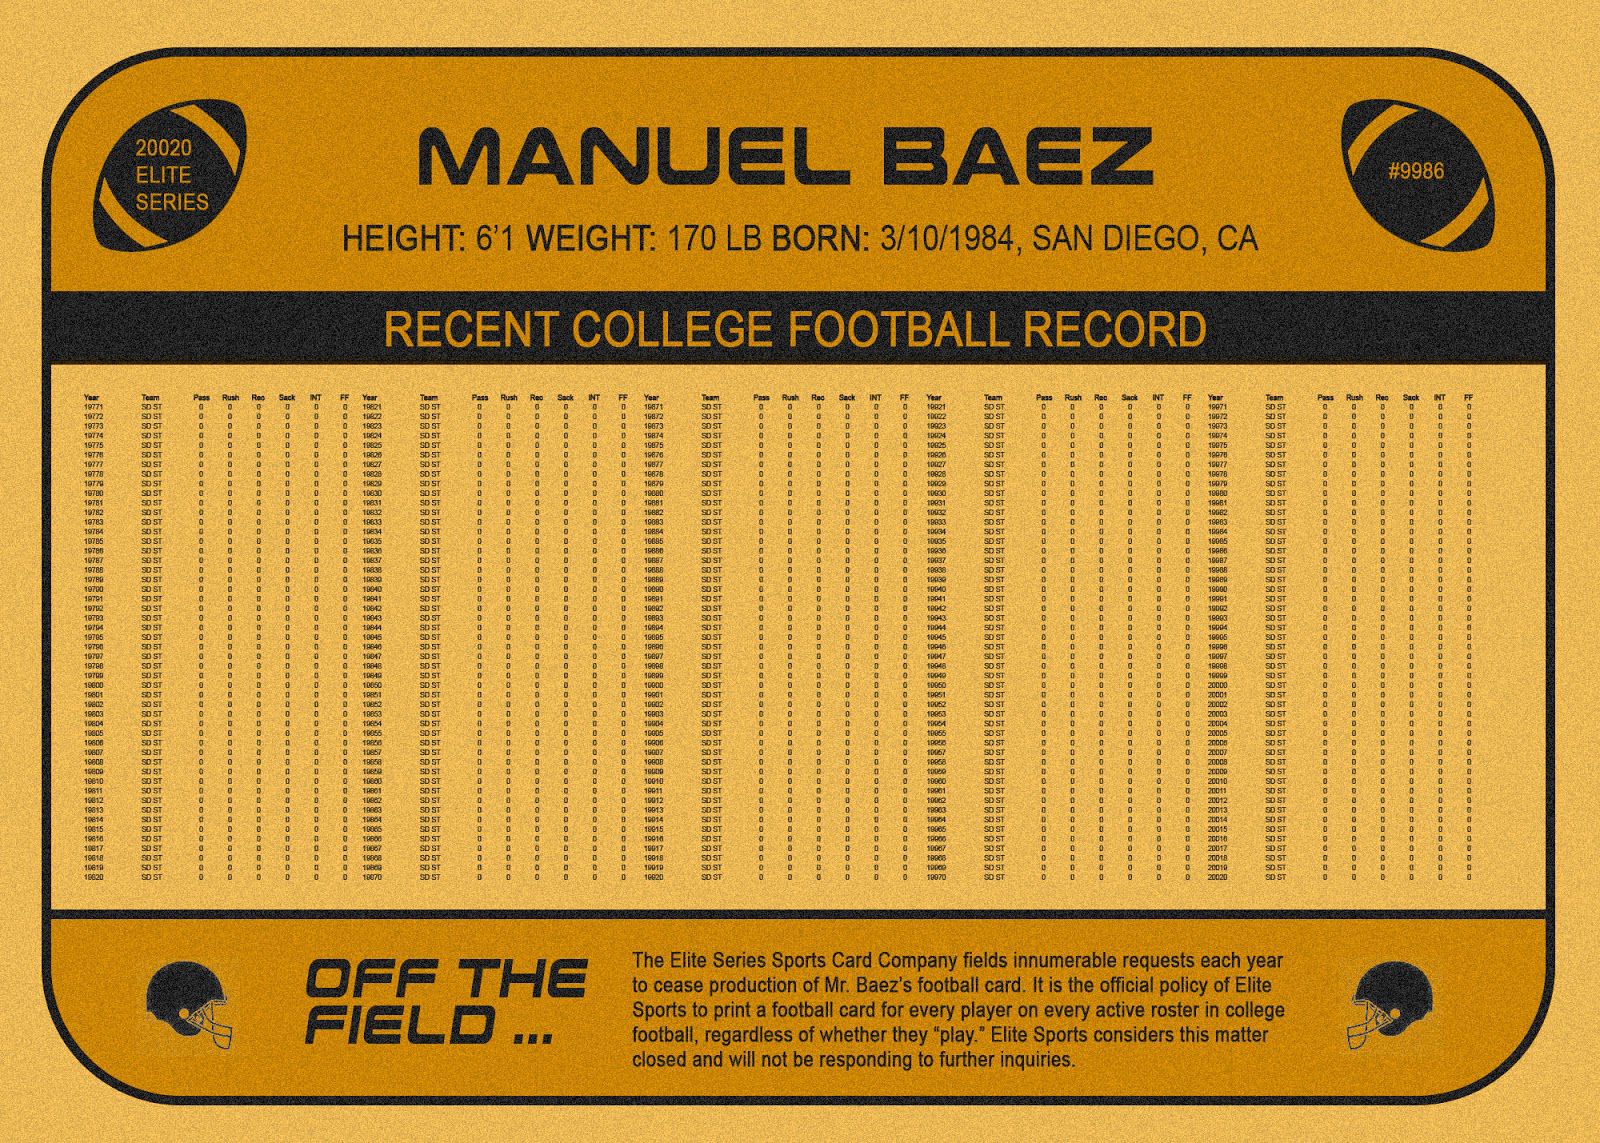 Manuel Baez’s football card. His bio reads: “The Elite Series Sports Card Company fields innumerable requests each year to cease production of Mr. Baez’s football card. It is the official policy of Elite Sports to print a football card for every player on every active roster in college football, regardless of whether they ‘play.’ Elite Sports considers this matter closed and will not be responding to further inquiries.”